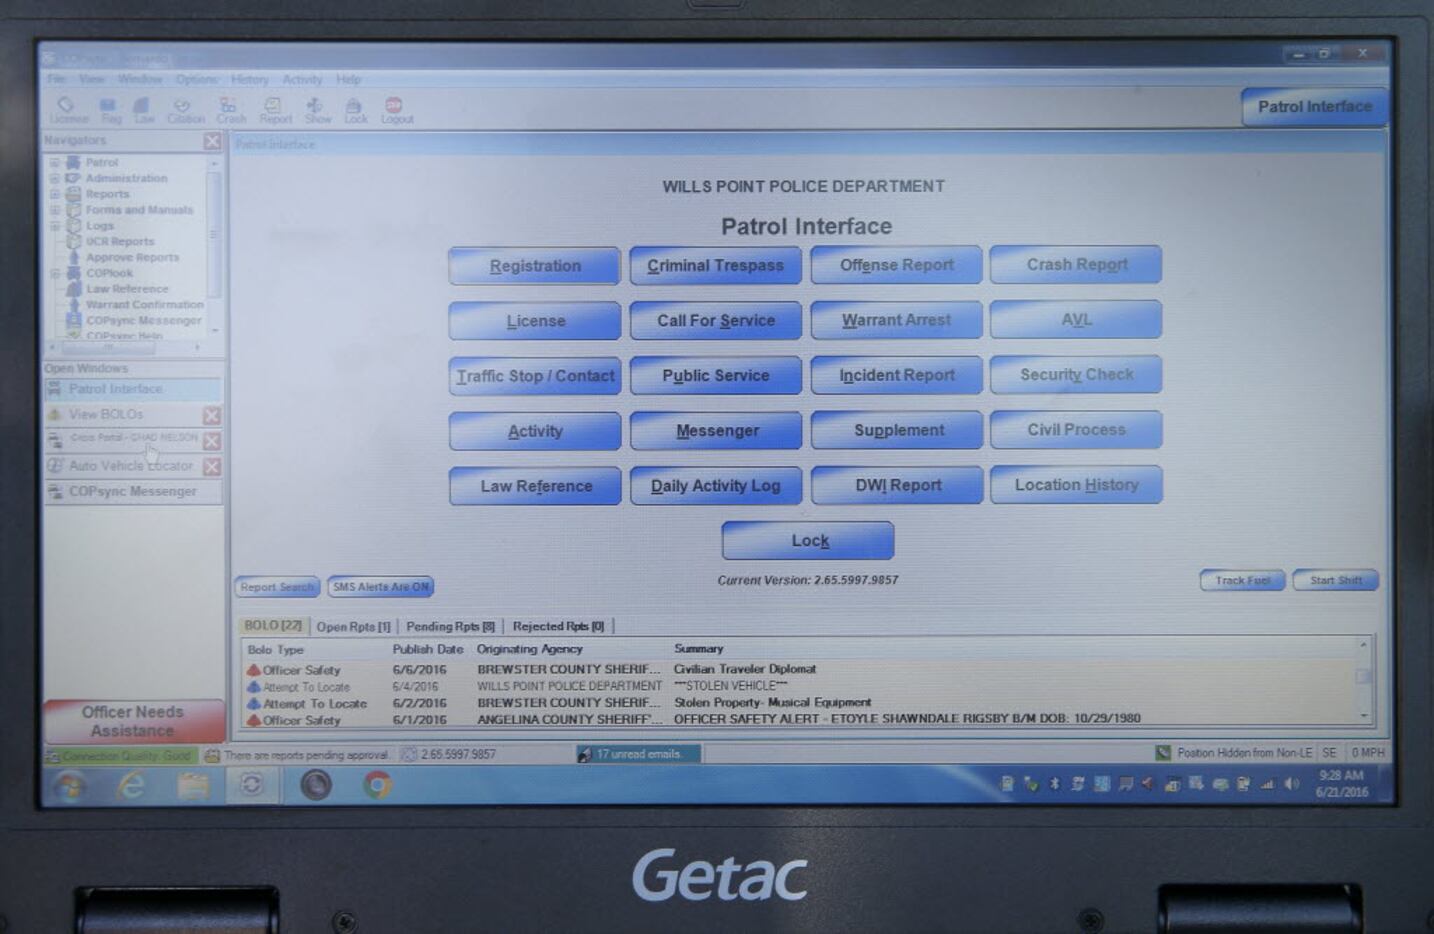 This is the main screen window of system using COPsync software, as seen from inside a...